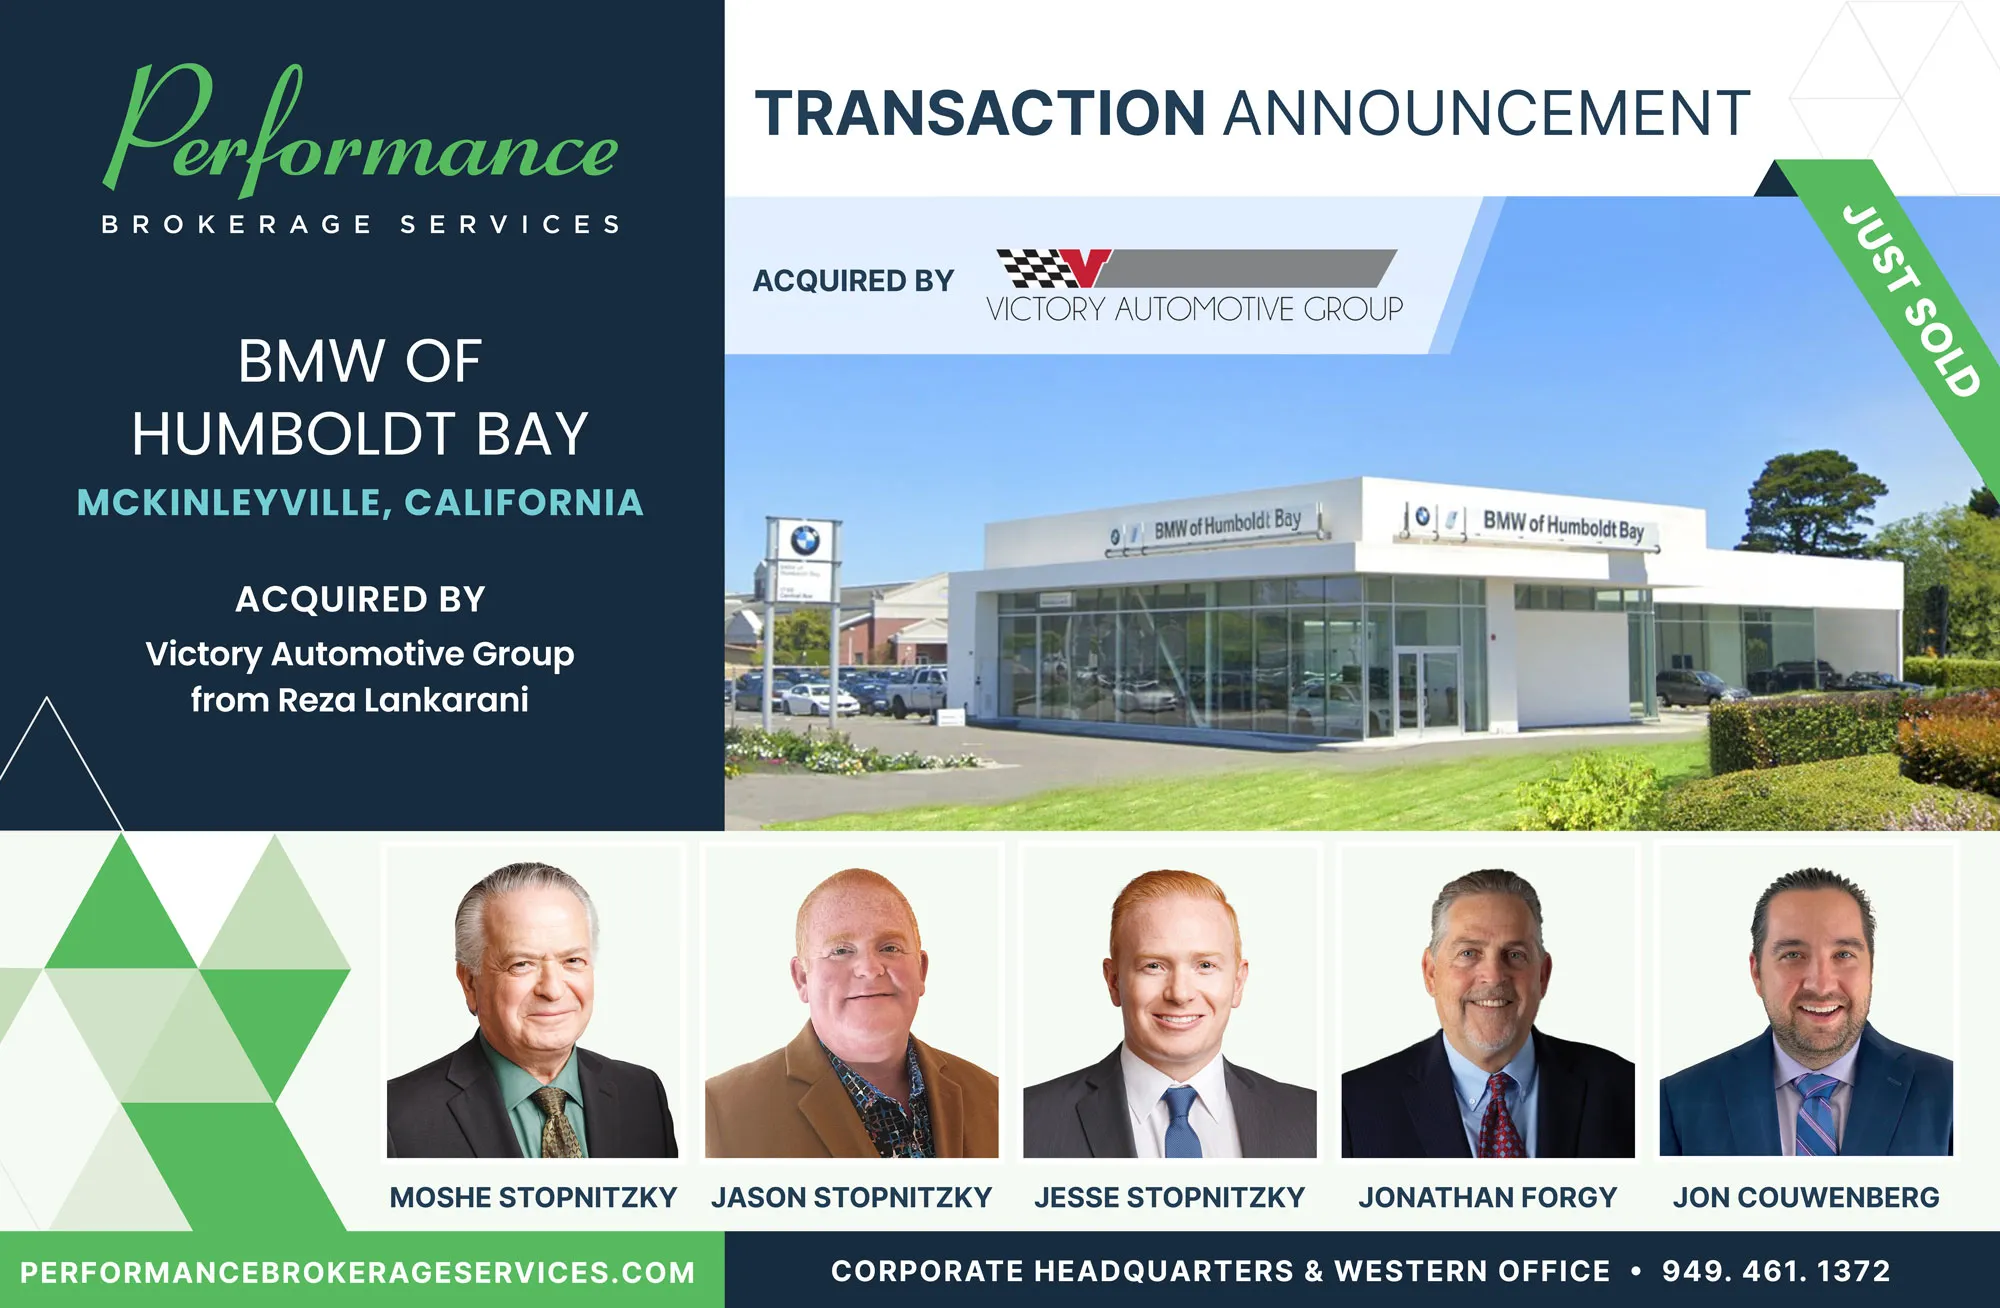 Performance Brokerage Services is proud to announce the sale of BMW of Humboldt Bay in McKinleyville, California to Victory Automotive Group from Reza Lankarani. The dealership will remain named BMW of Humboldt Bay. This transaction was exclusively facilitated by Performance Brokerage Services.